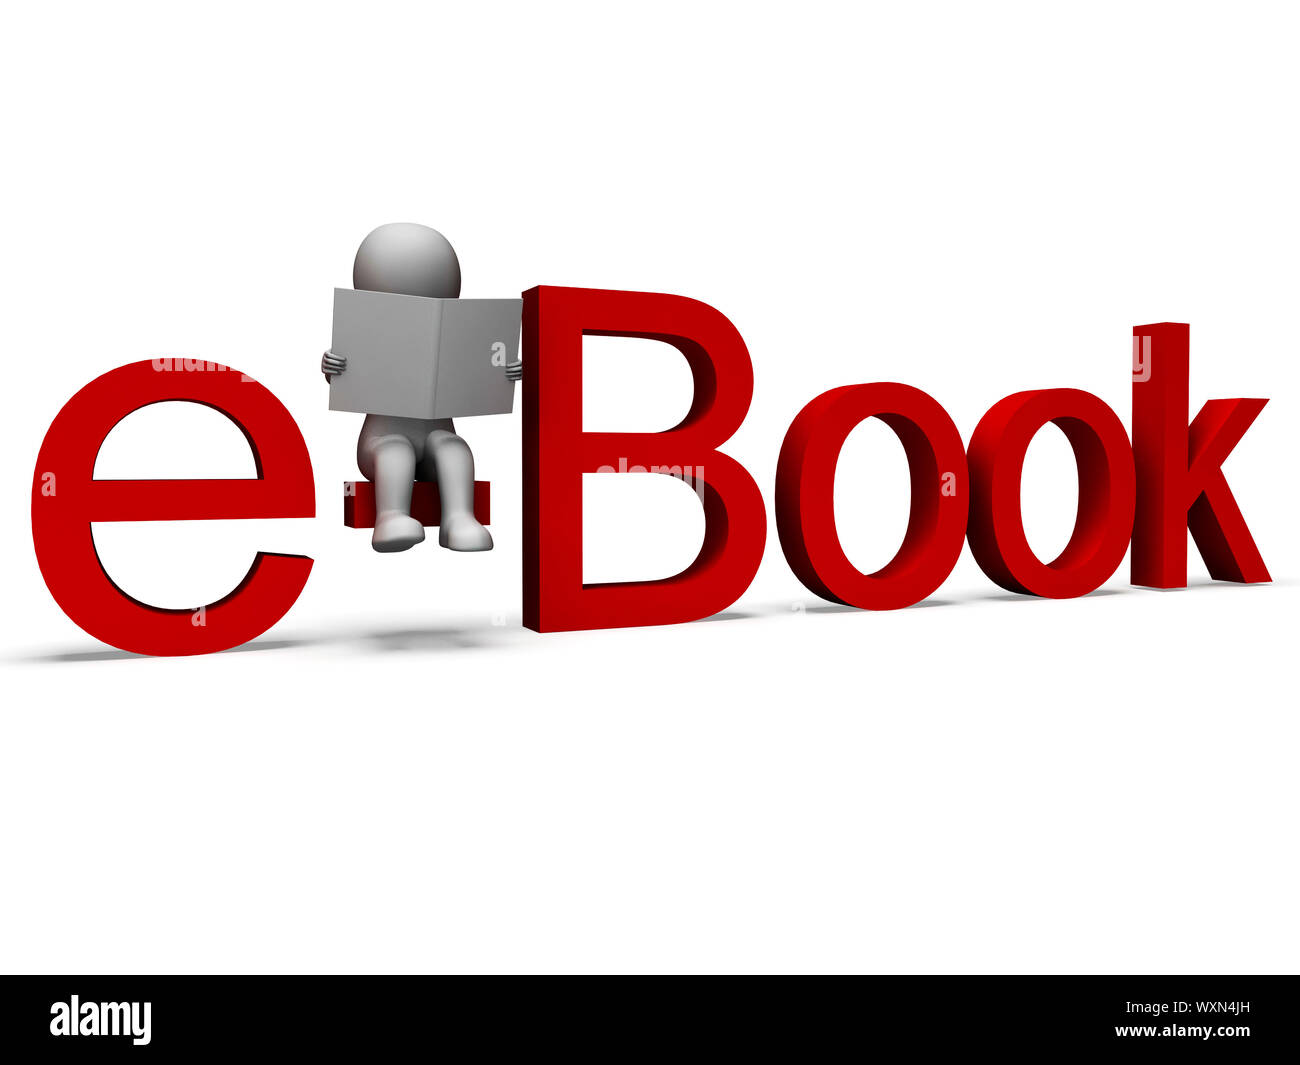 Ebook Word Shows Electronic Library Or Online Books Stock Photo